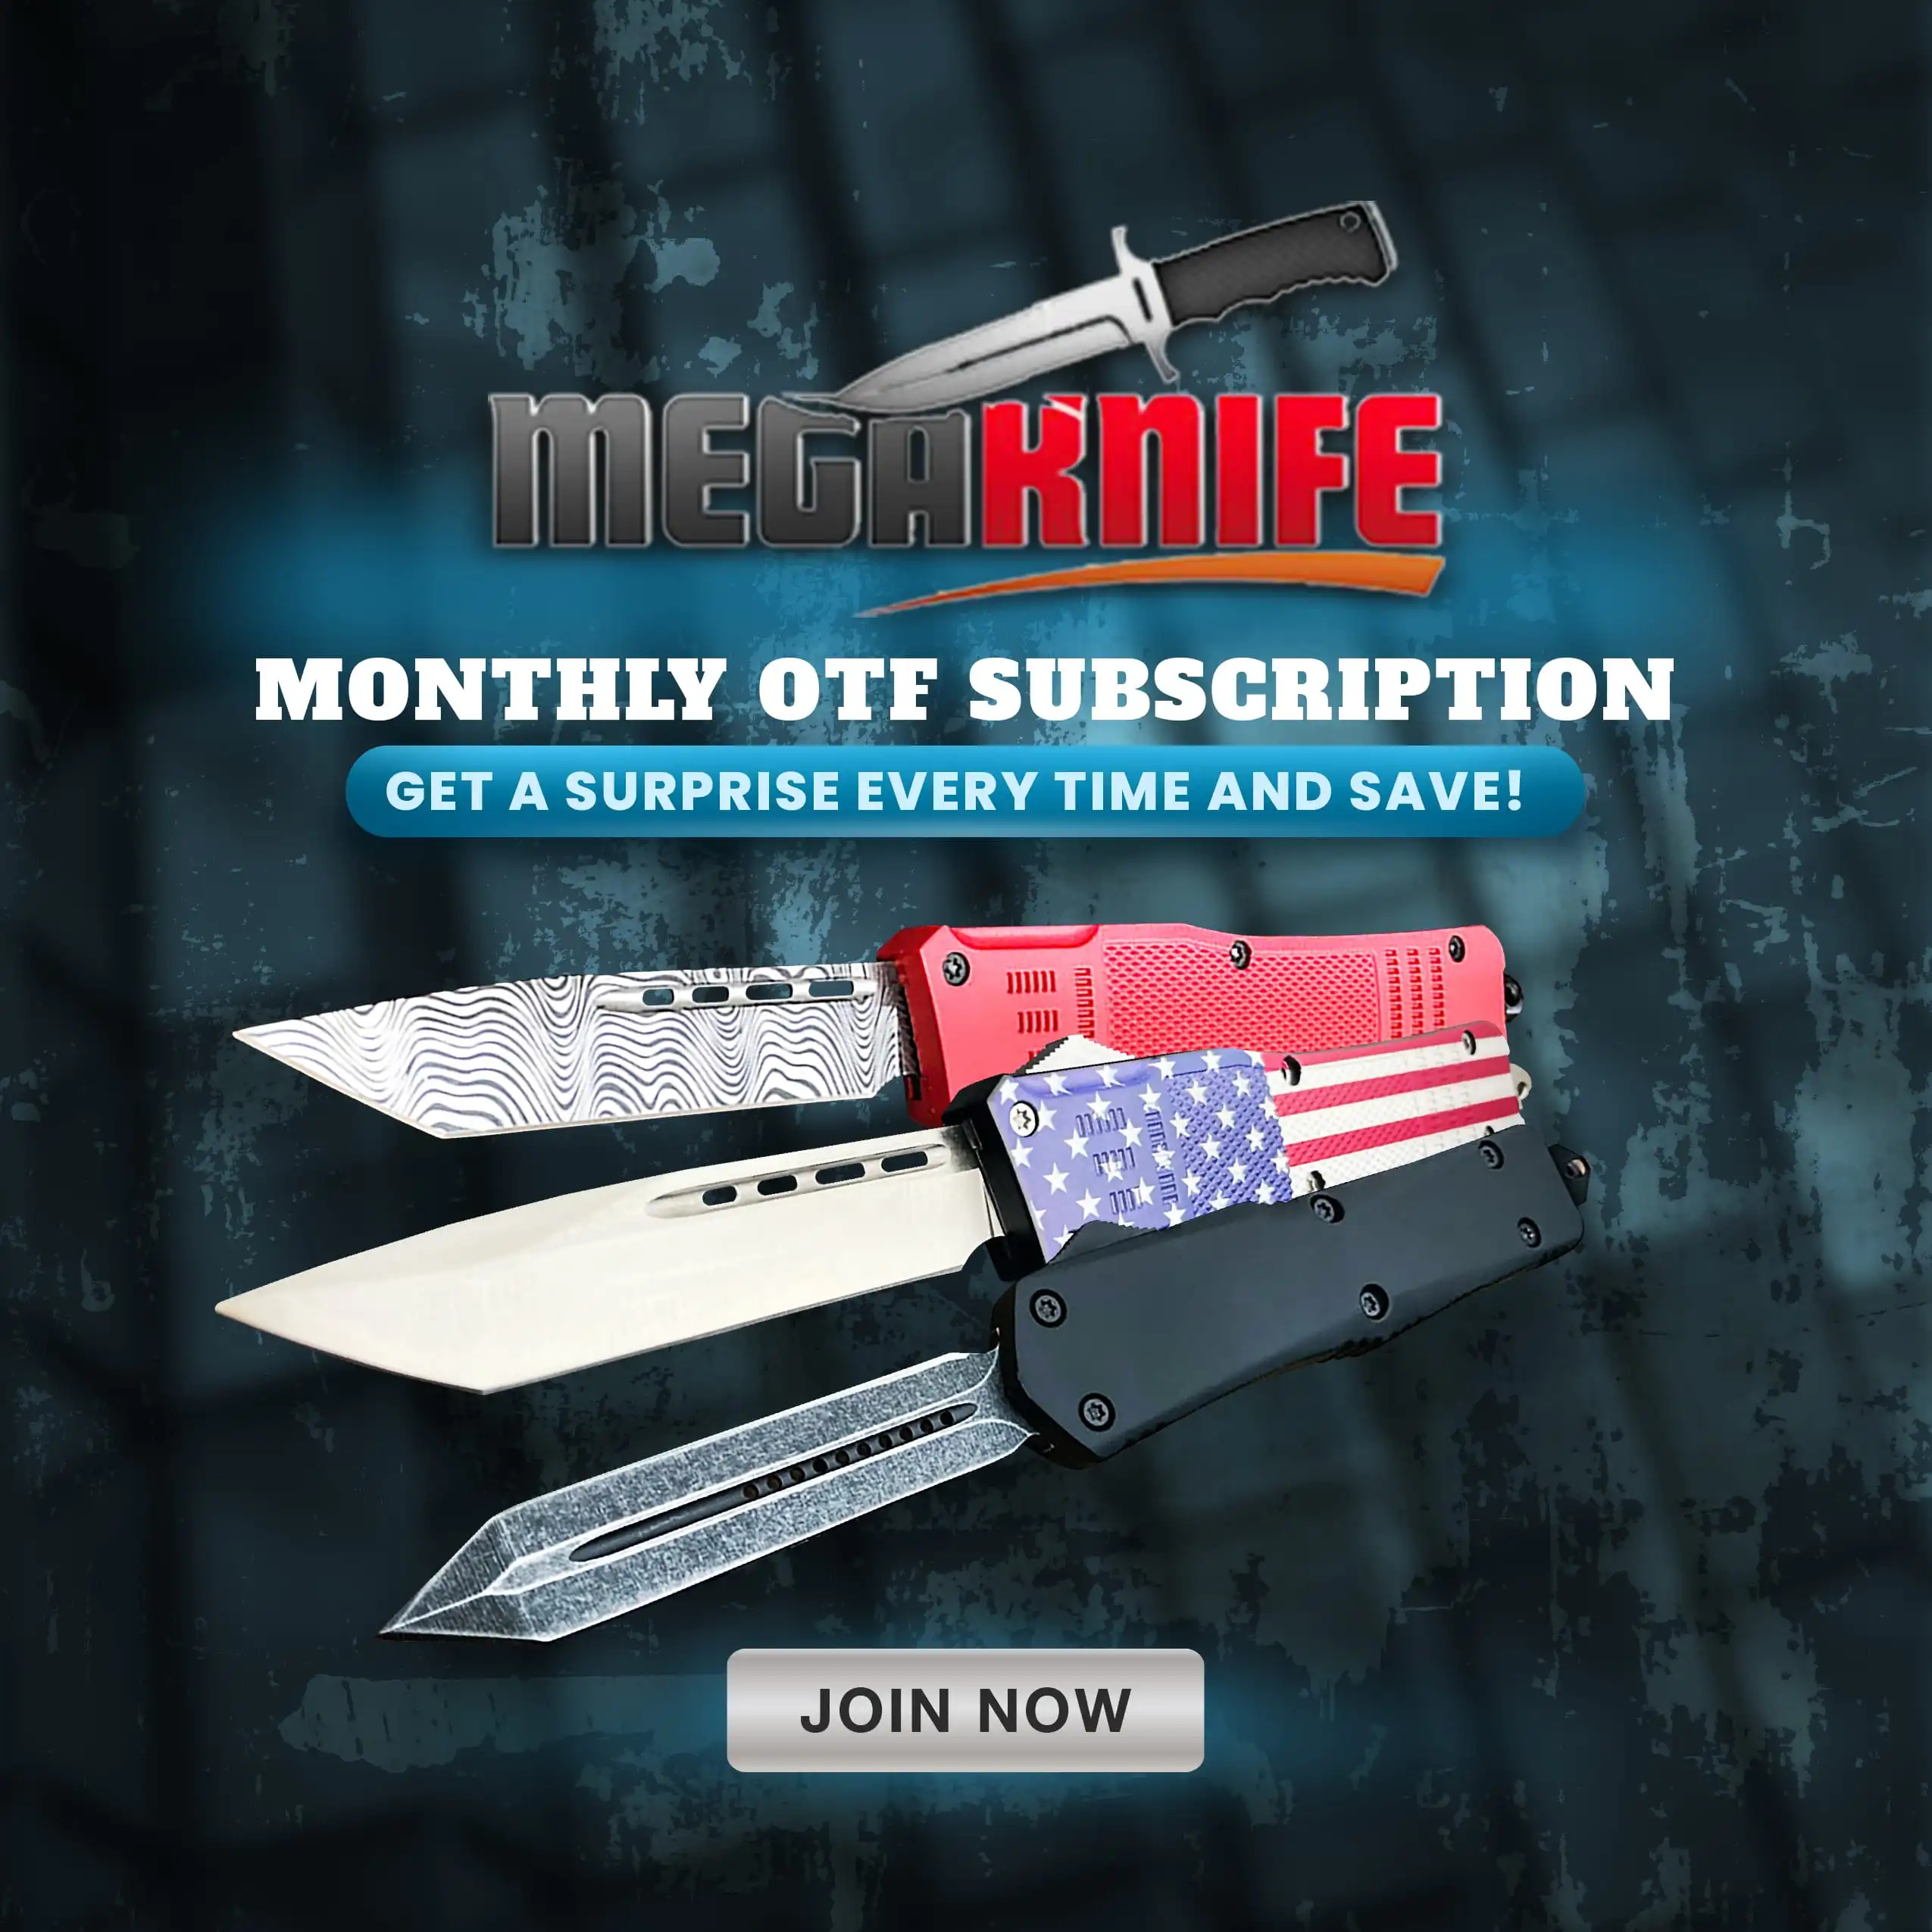 Knife of the month club